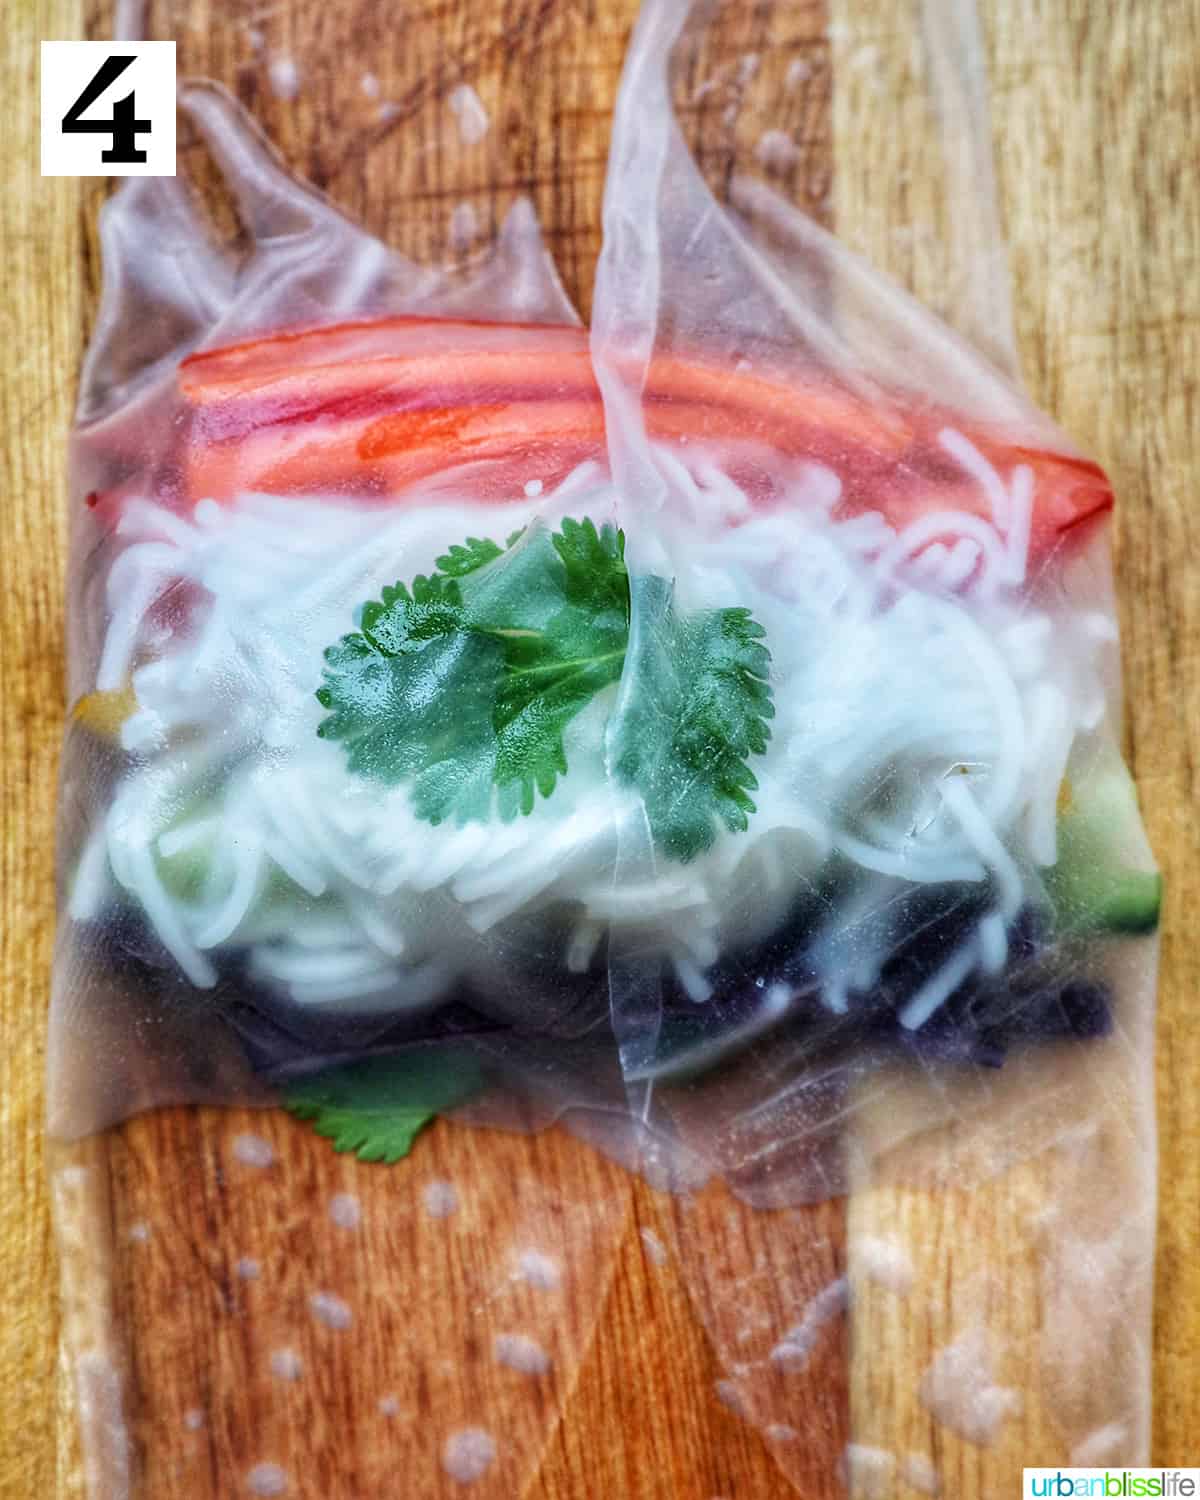 rice paper roll topped with vermicelli rice noodles and sliced colorful vegetables on a wooden cutting board.